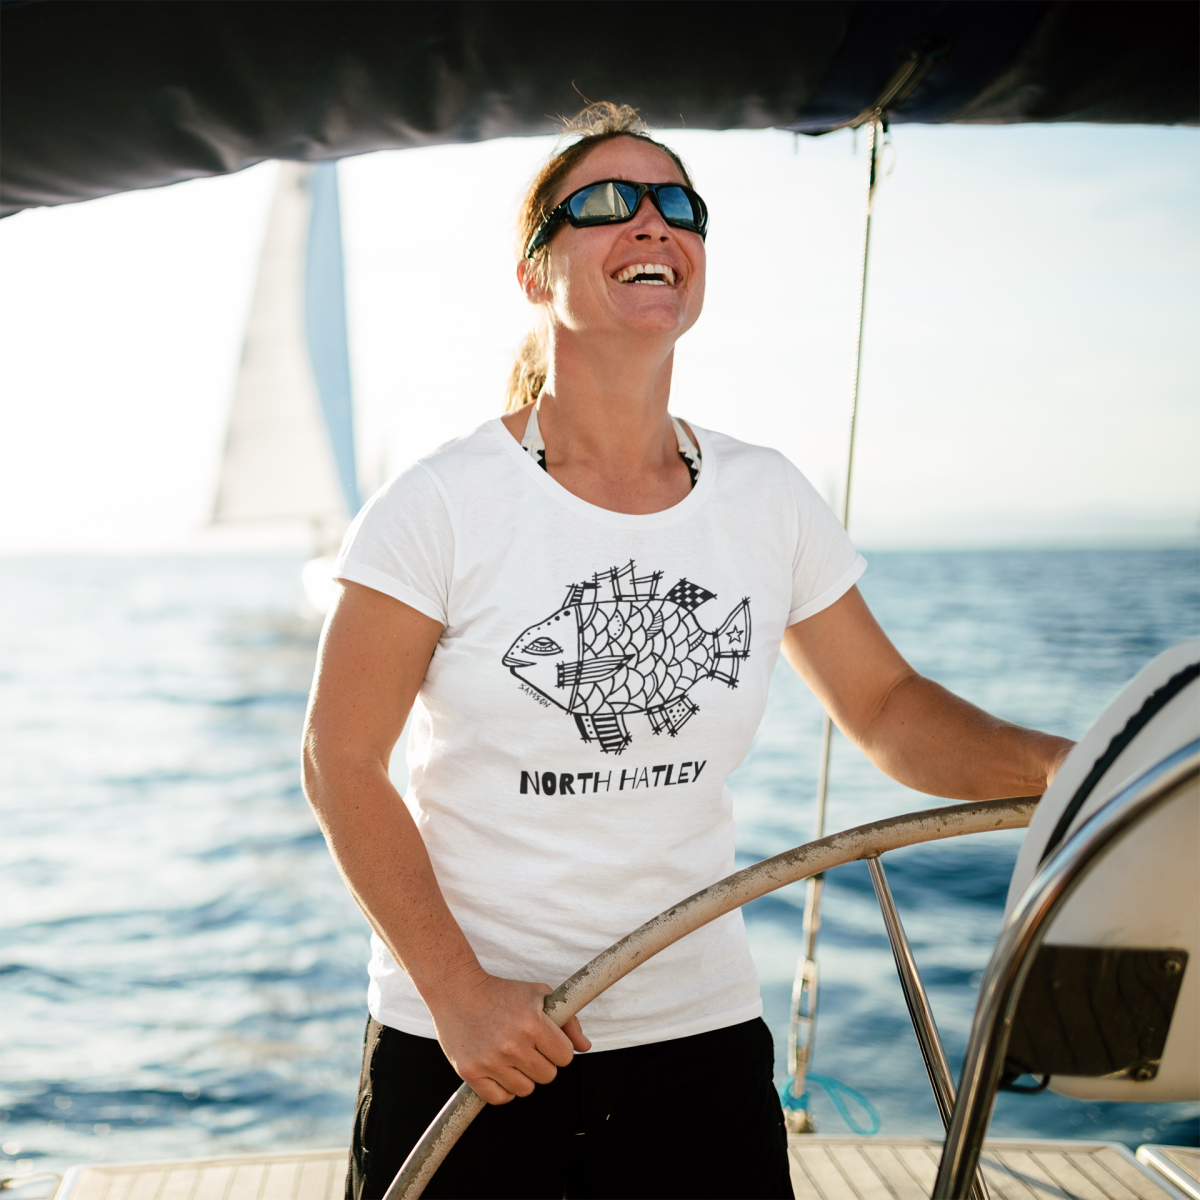 https://www.marcsamsonartist.com/wp-content/gallery/north-hatley/t-shirt-mockup-featuring-a-smiling-woman-on-a-fishing-boat-40630-r-el2.png